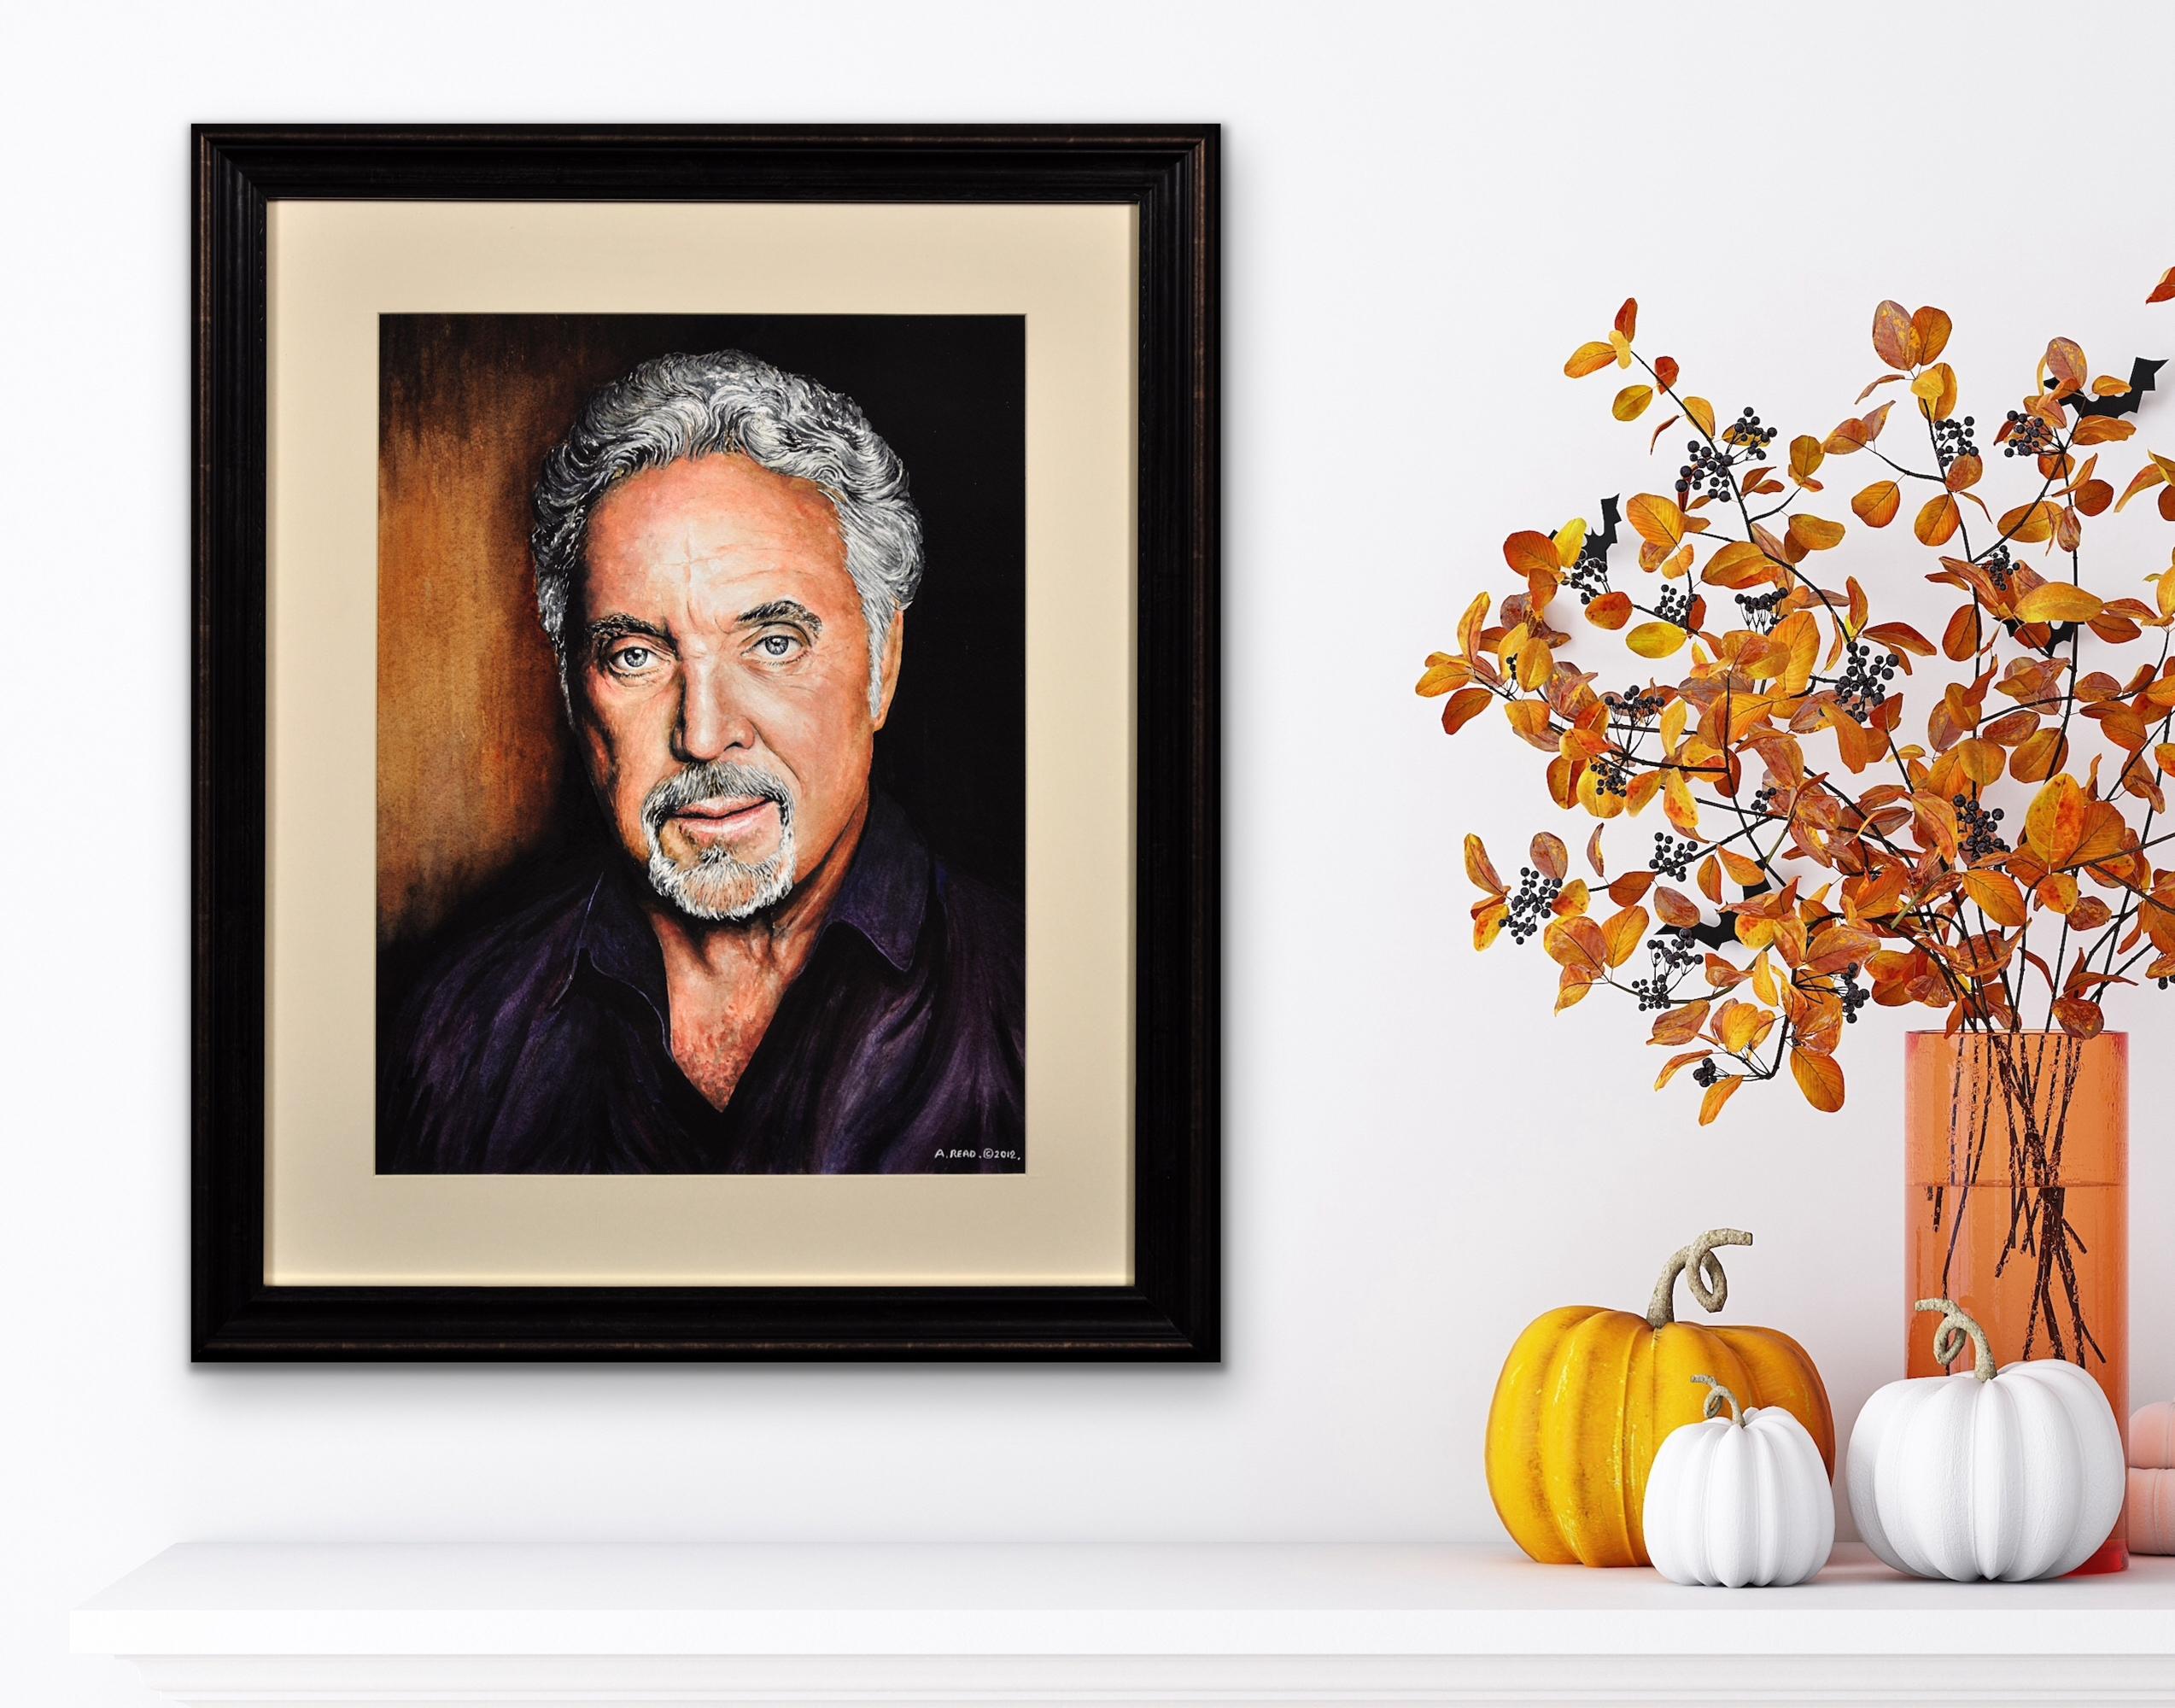 Tom Jones. Brilliant and popular as ever and is truly The Voice! Team Tom. For Sale 2